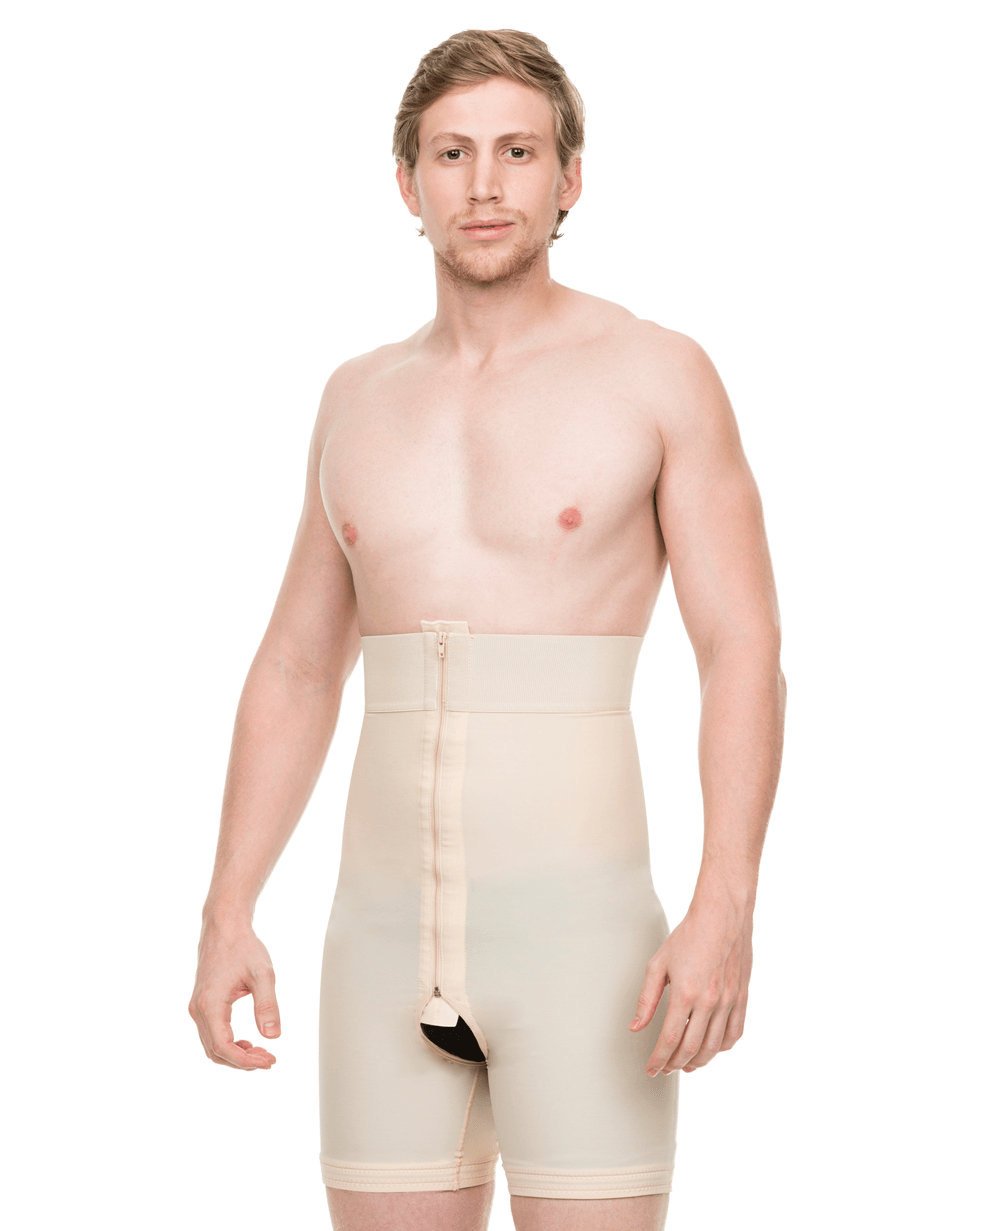 Post Surgery Compression Girdles  The Fitting Service – The Fitting Service